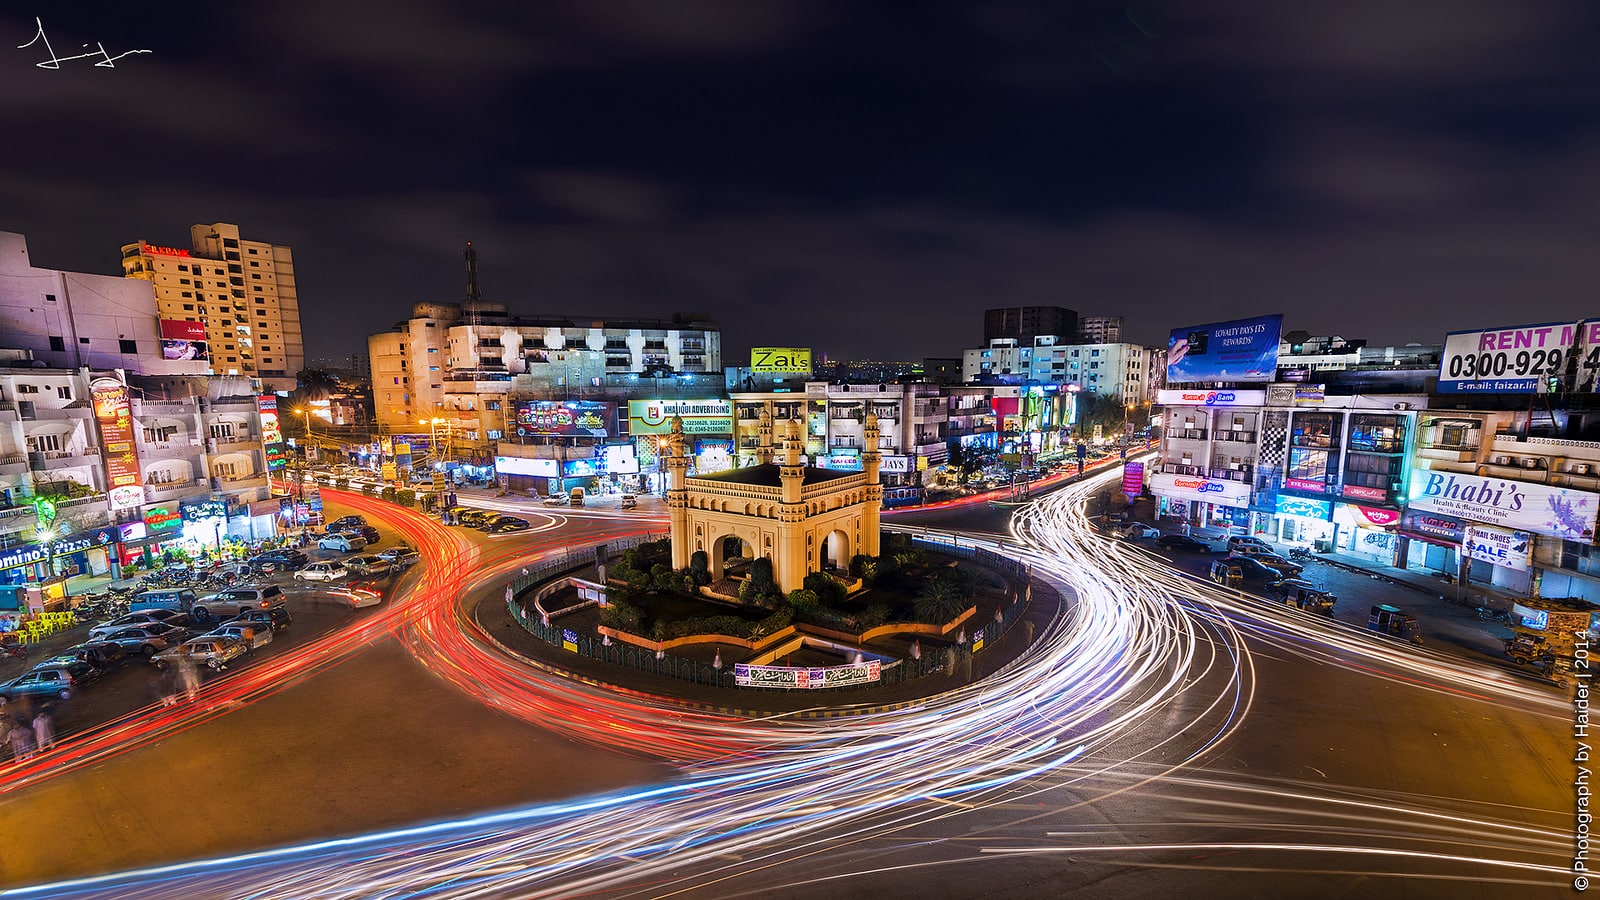 15 Amazing Images That Show Why Karachi is the City of Lights!